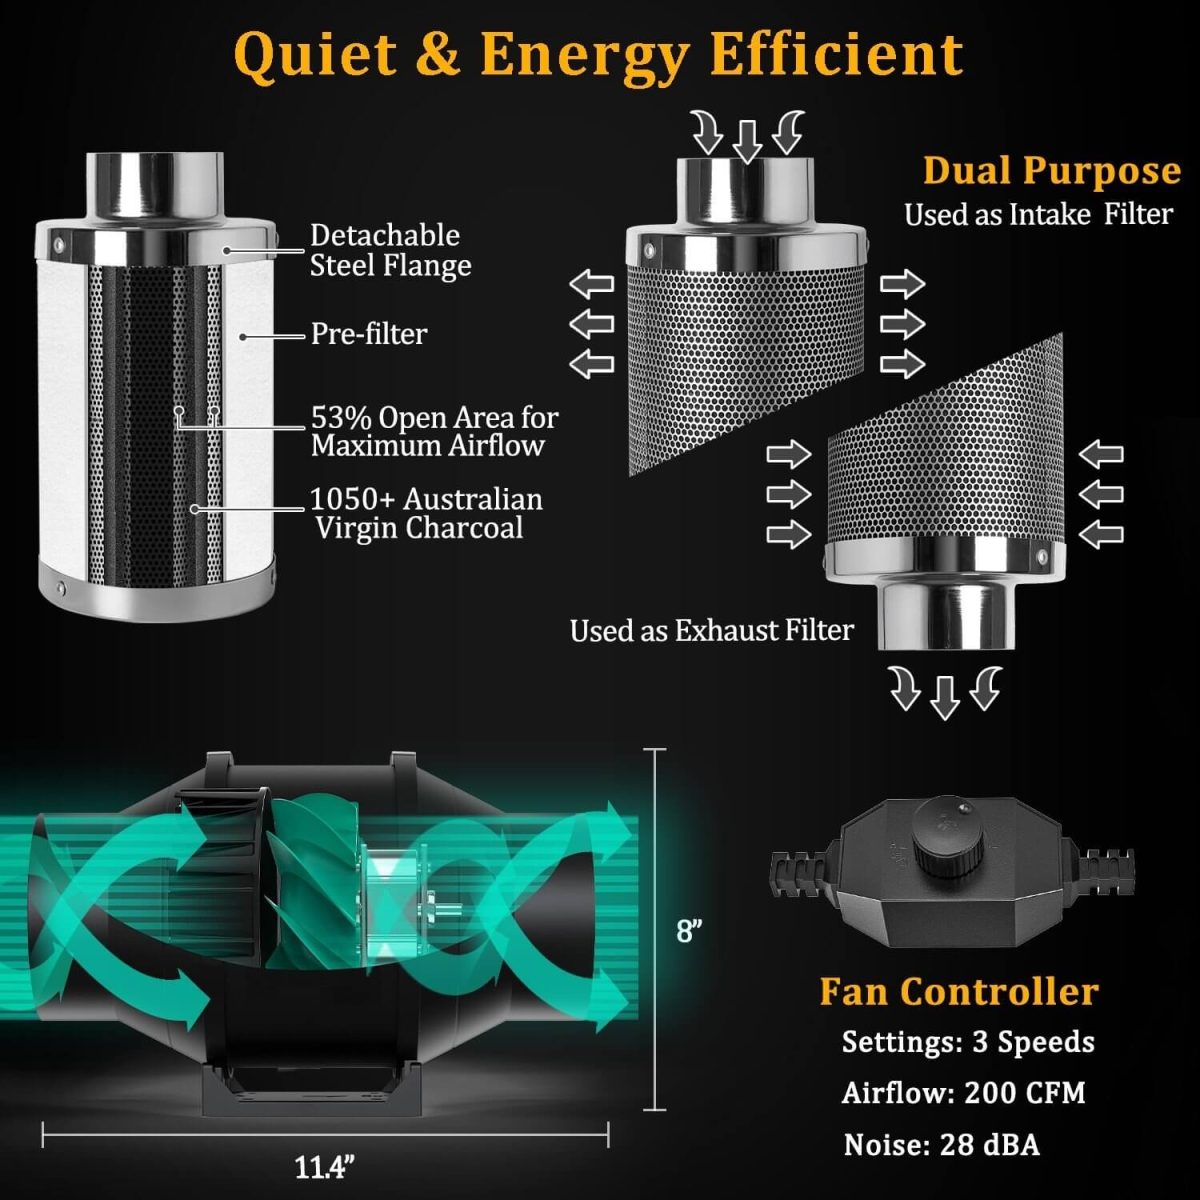 Quiet and energy efficient inline fan, quality carbon filter used as intake or exhaust.